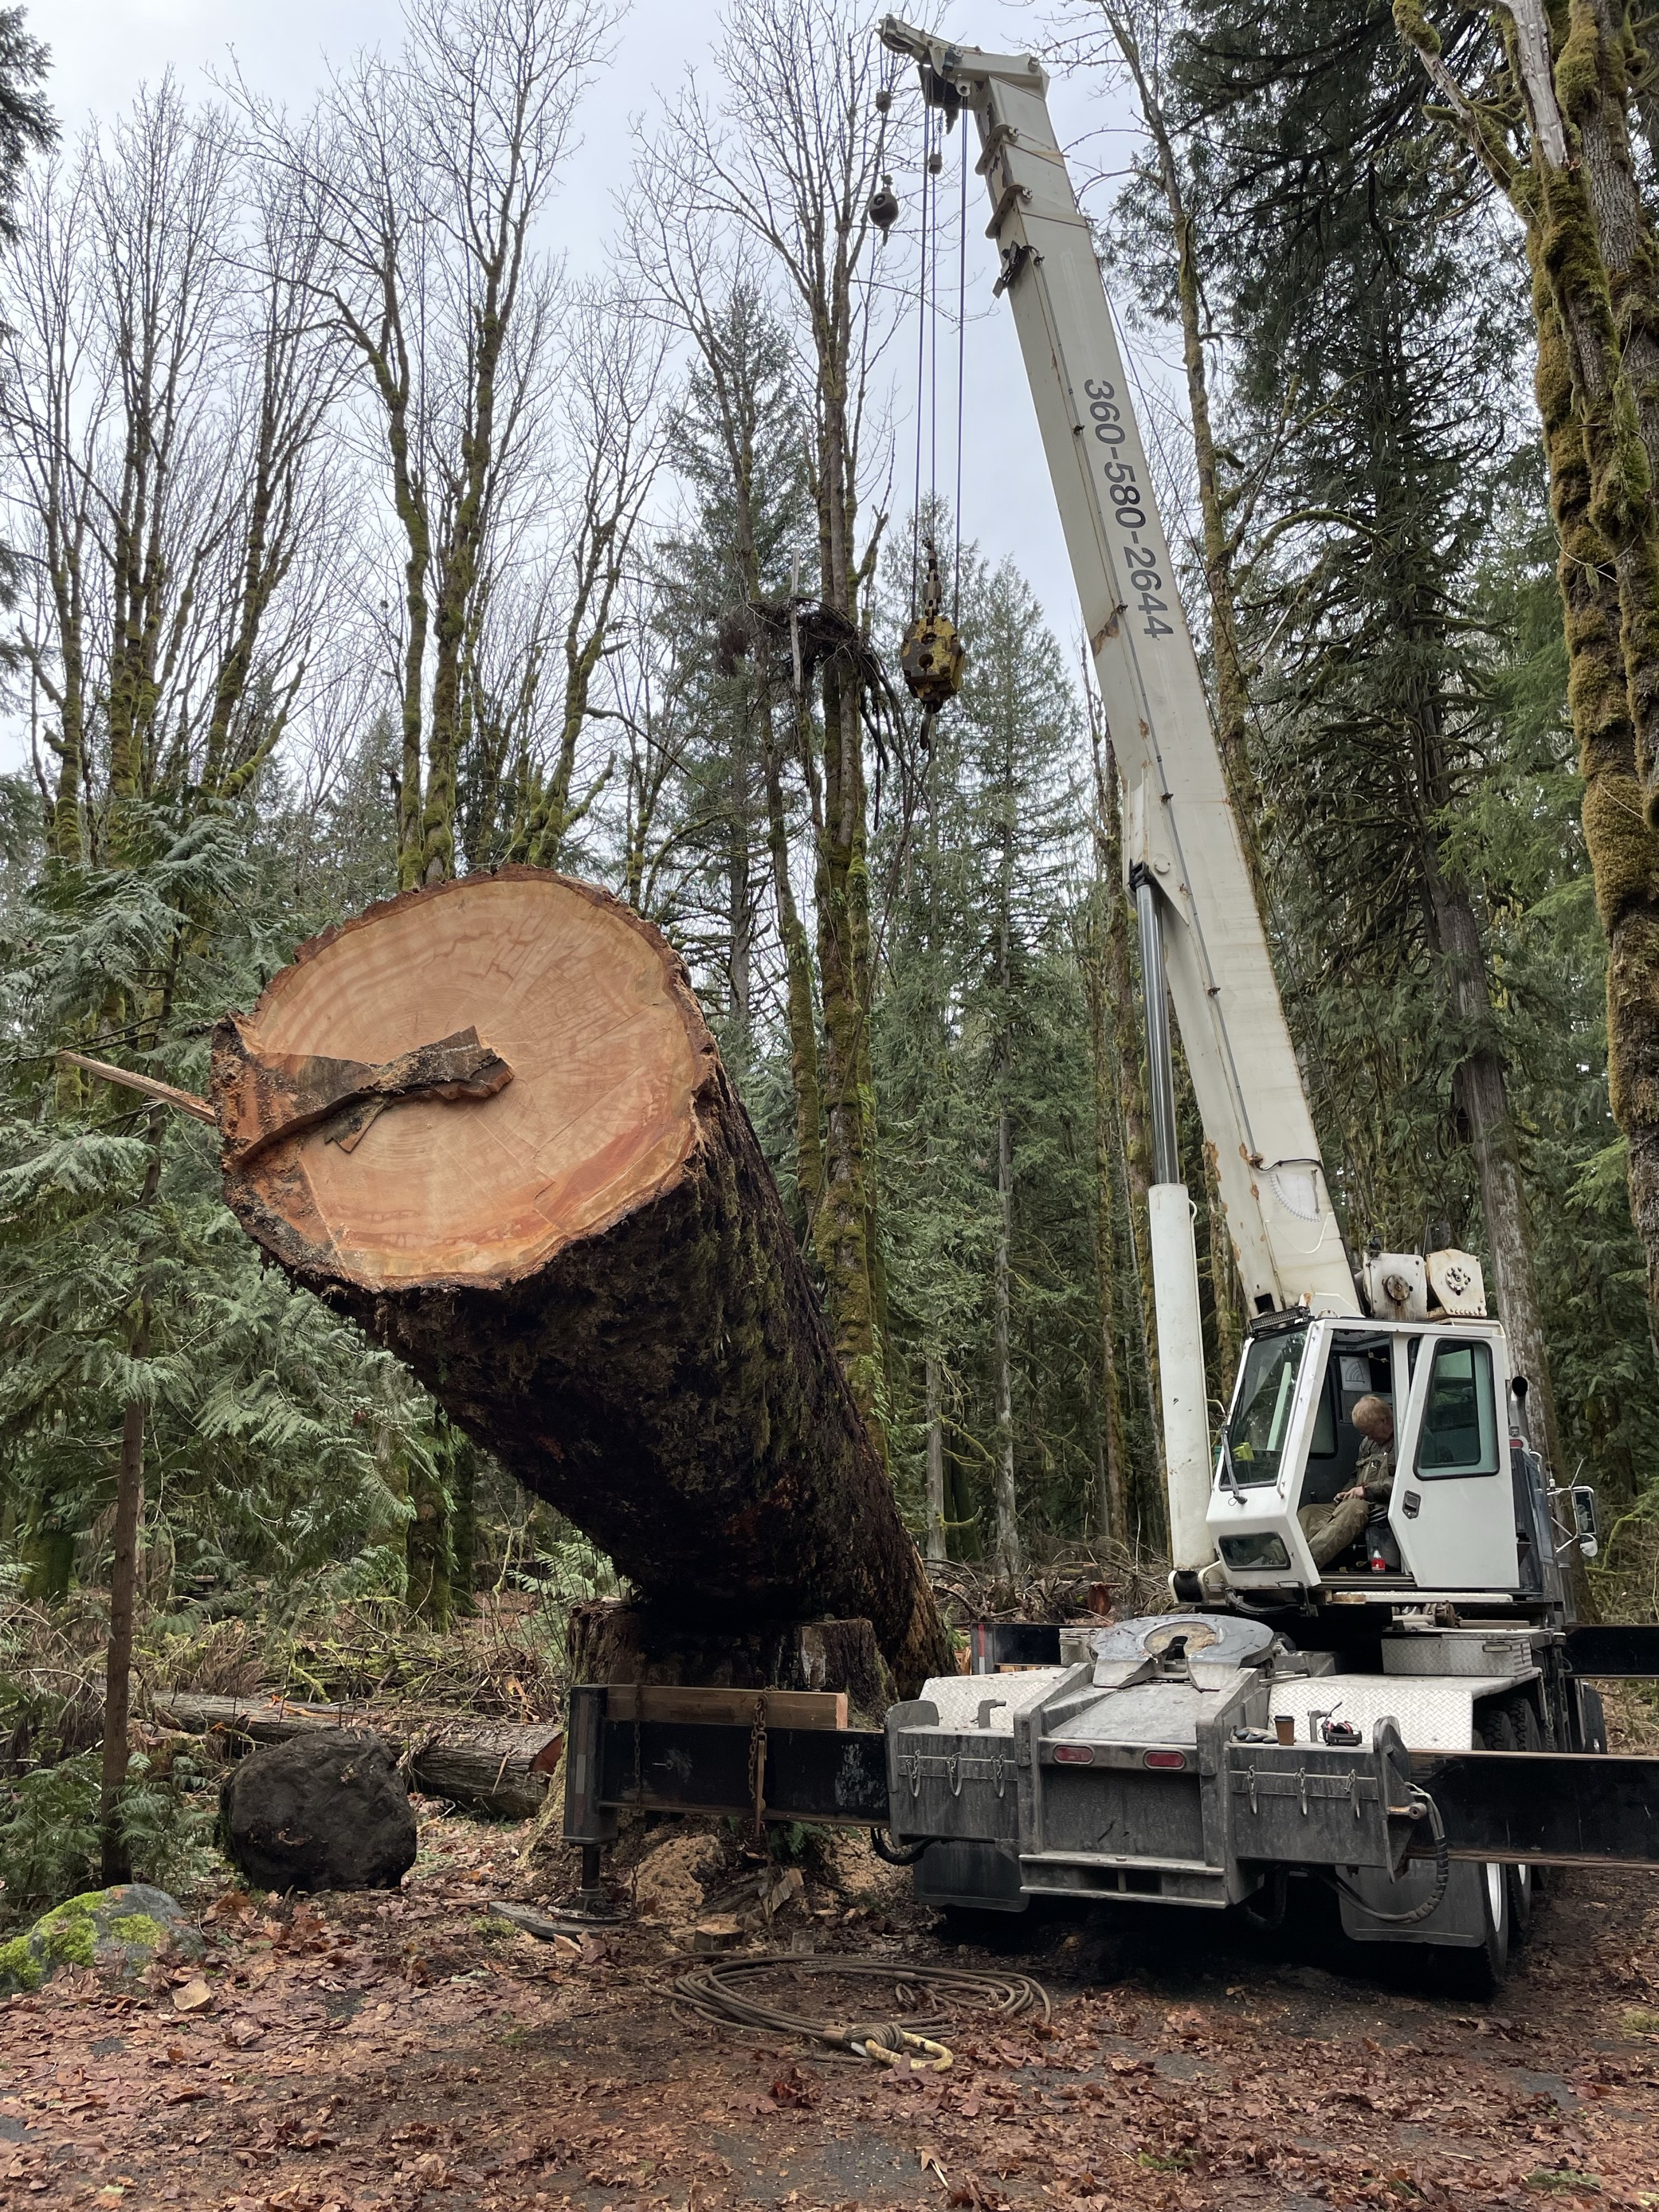 Large cedar being removed from the forest with an excavator